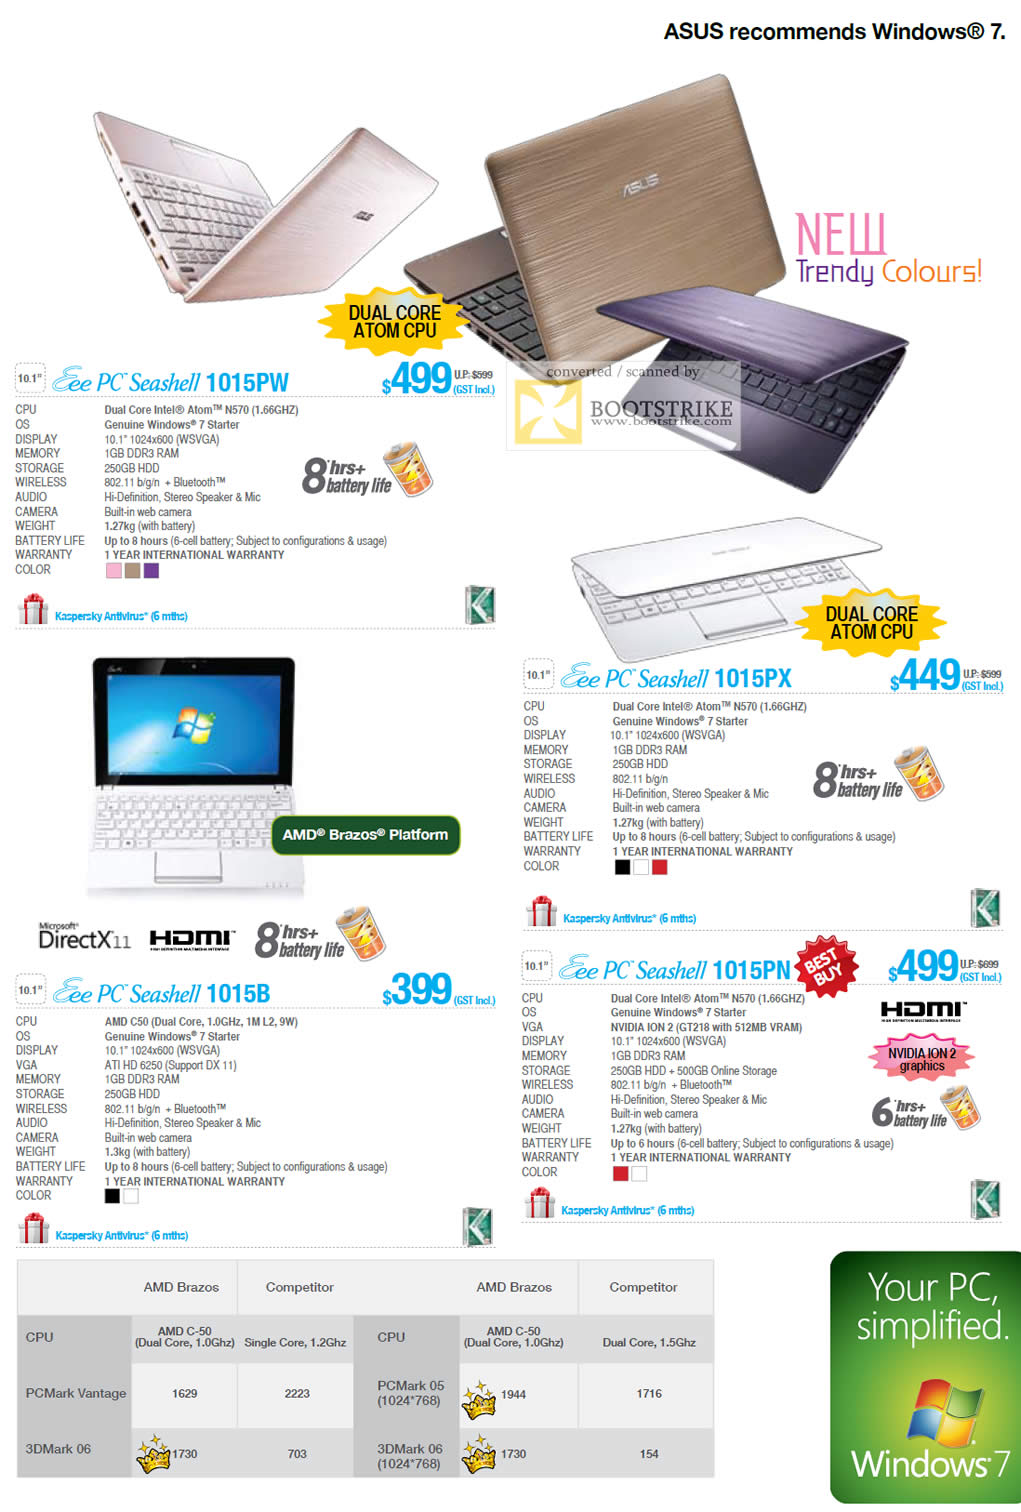 PC Show 2011 price list image brochure of ASUS Netbooks Eee PC Seashell 1015PW 1015PX 1015PN 1015B